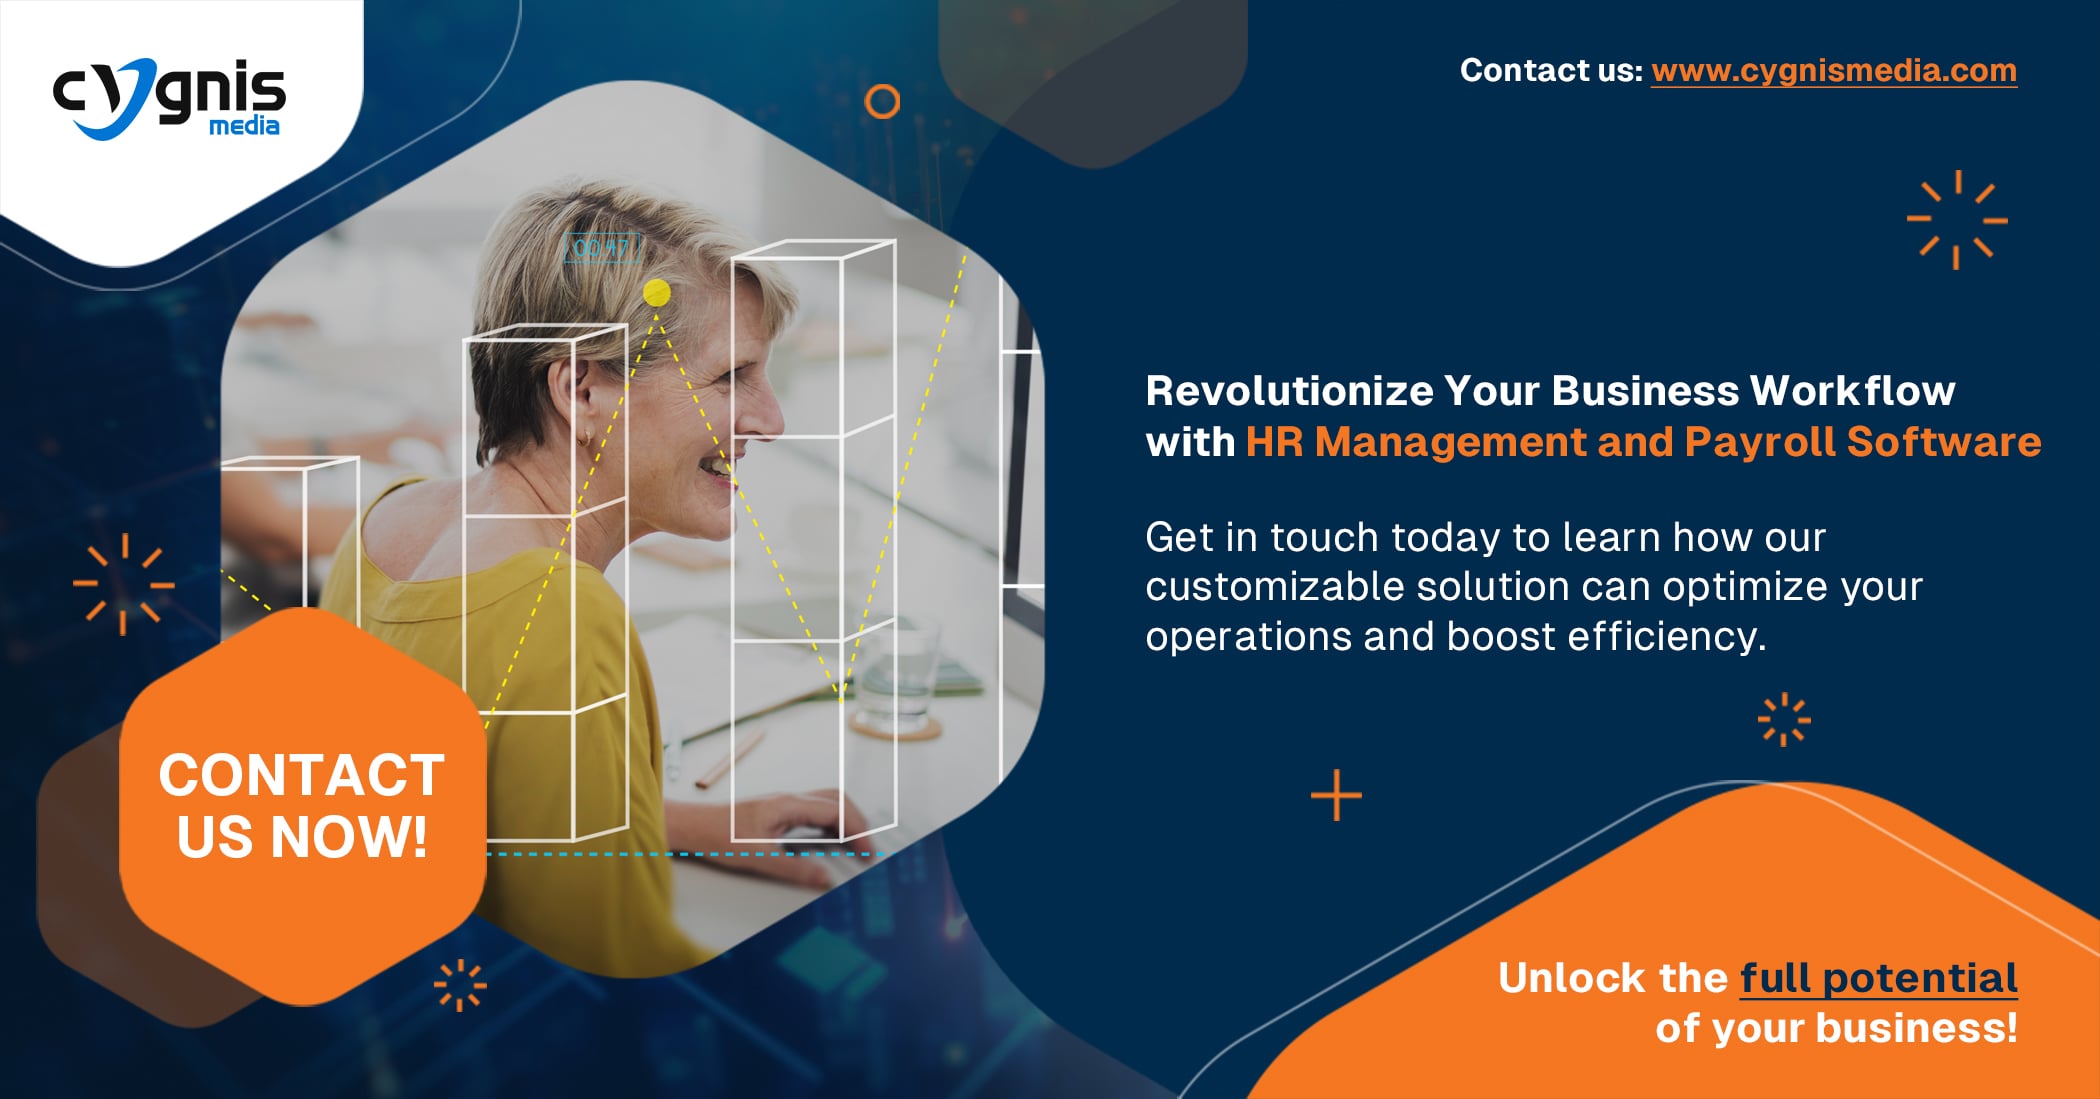 Contact us to Revolutionize Your Business Workflow with HR Management and Payroll Software